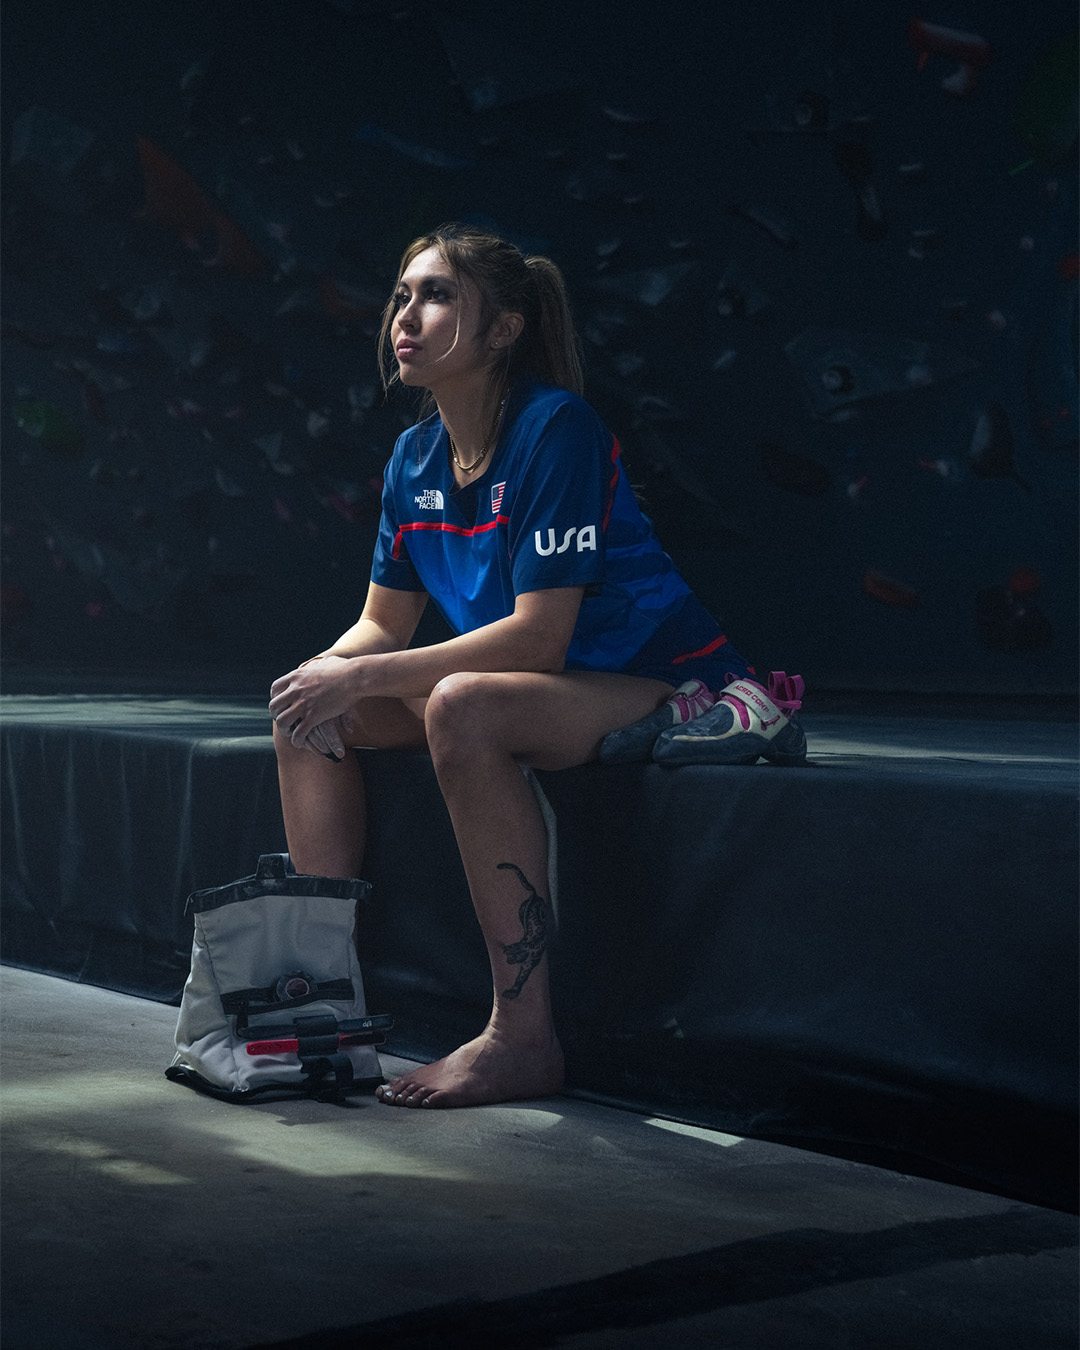 Athlete in a USA jersey sits beside climbing gear, focused and contemplative before a competition